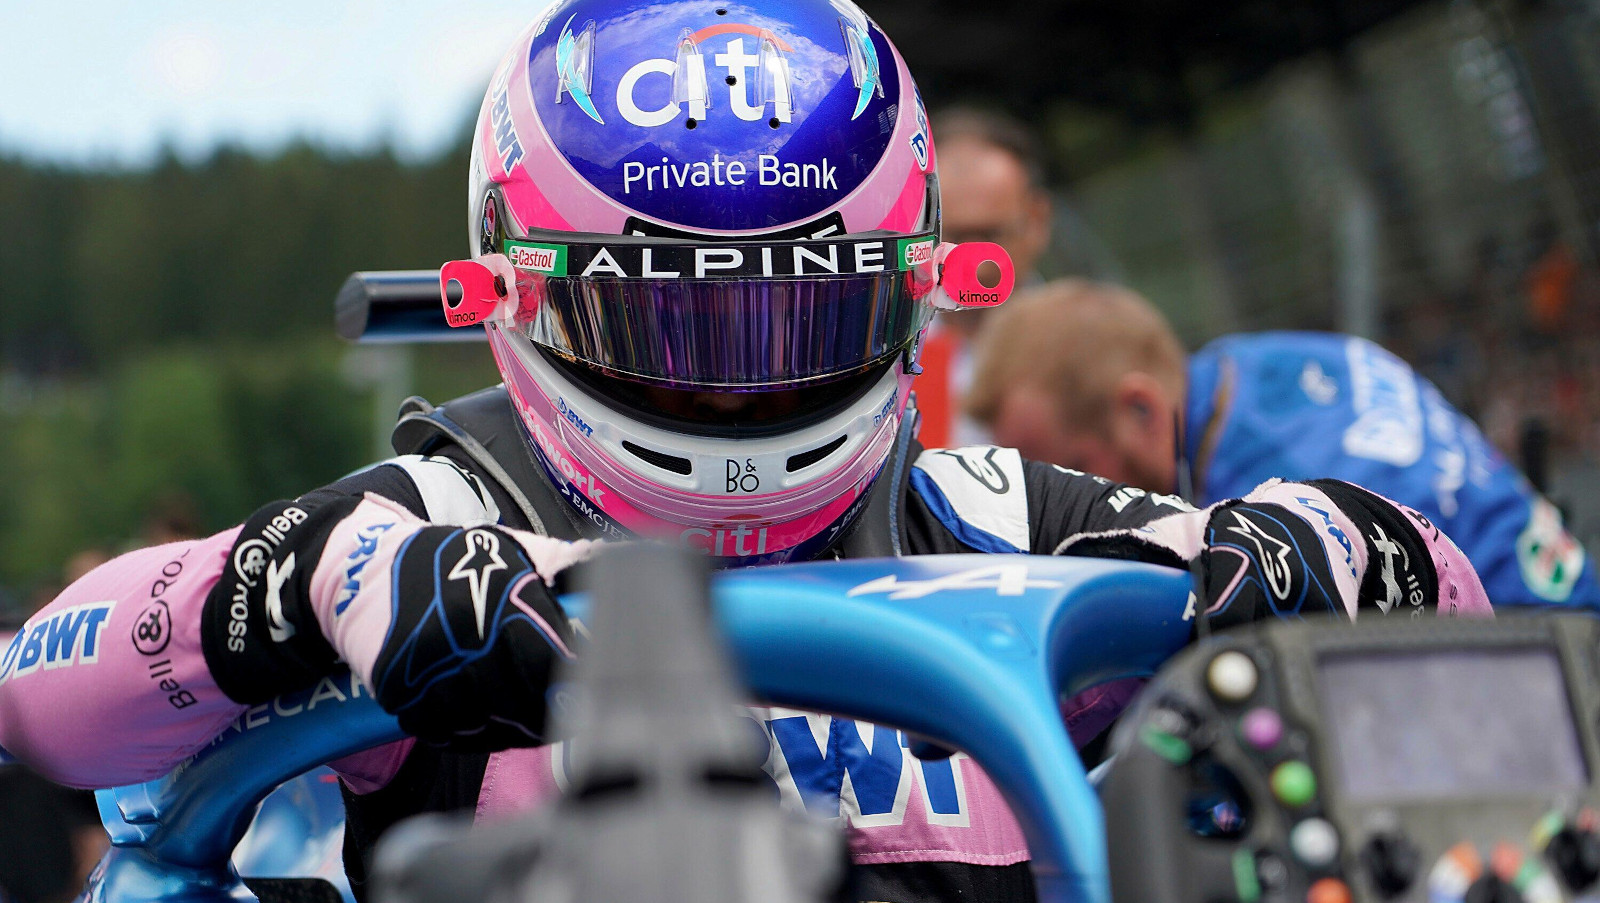 Fernando Alonso climbs into his car on the grid, steering wheel on the car's nose. Austria July 2022